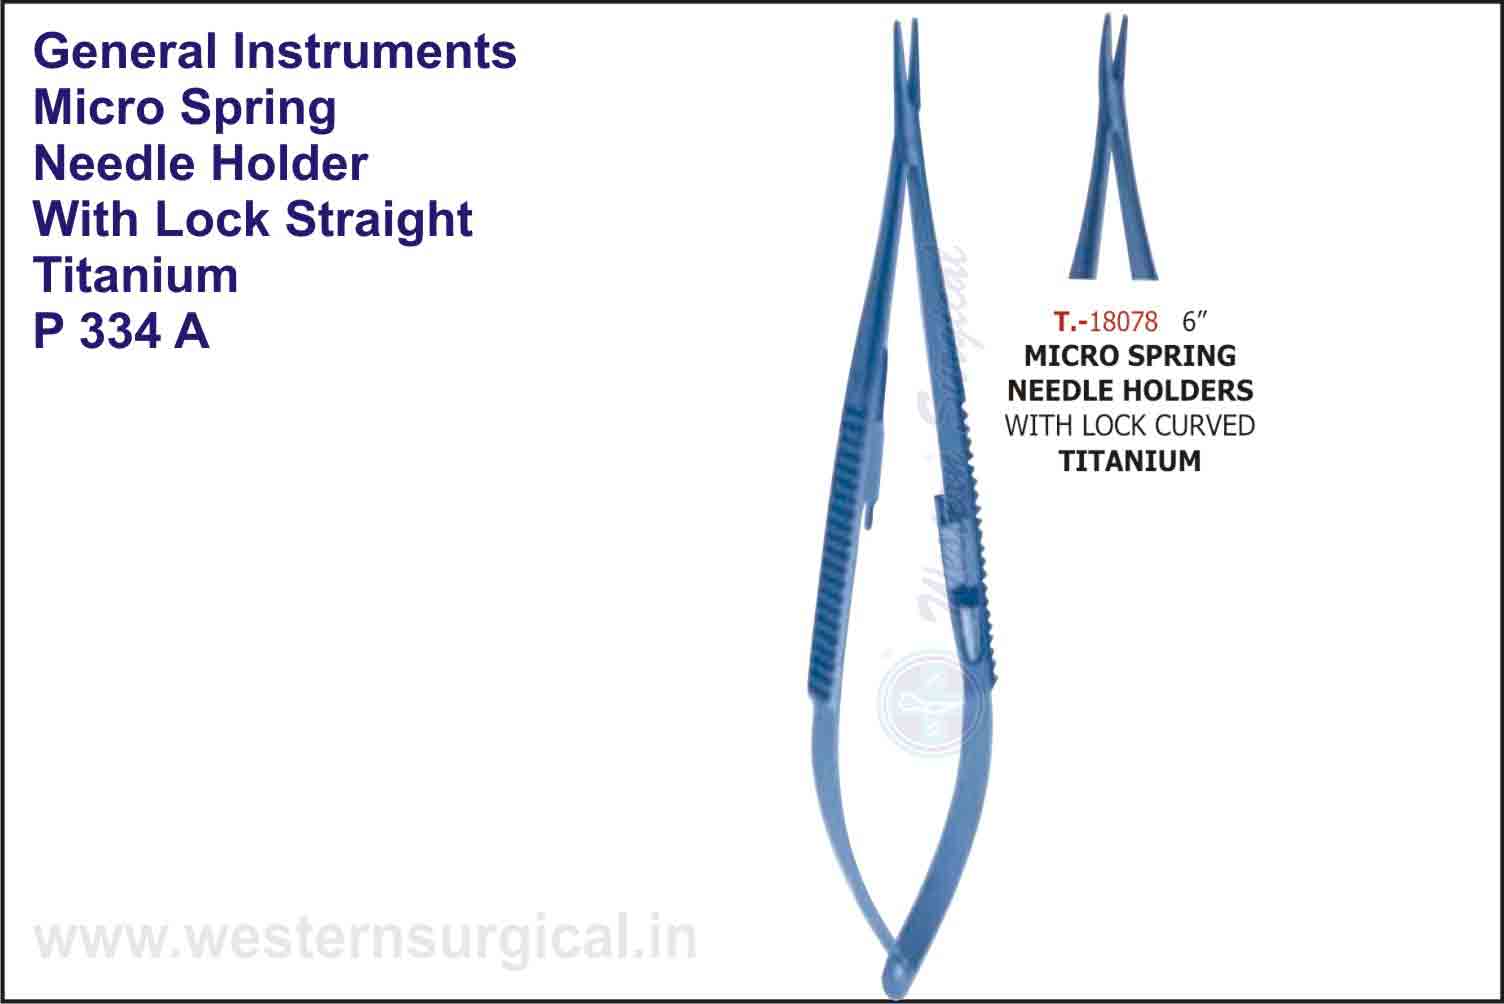 MICRO SPRING NEEDLE HOLDER WITH LOCK STRAIGHT & CURVED - TITANIUM